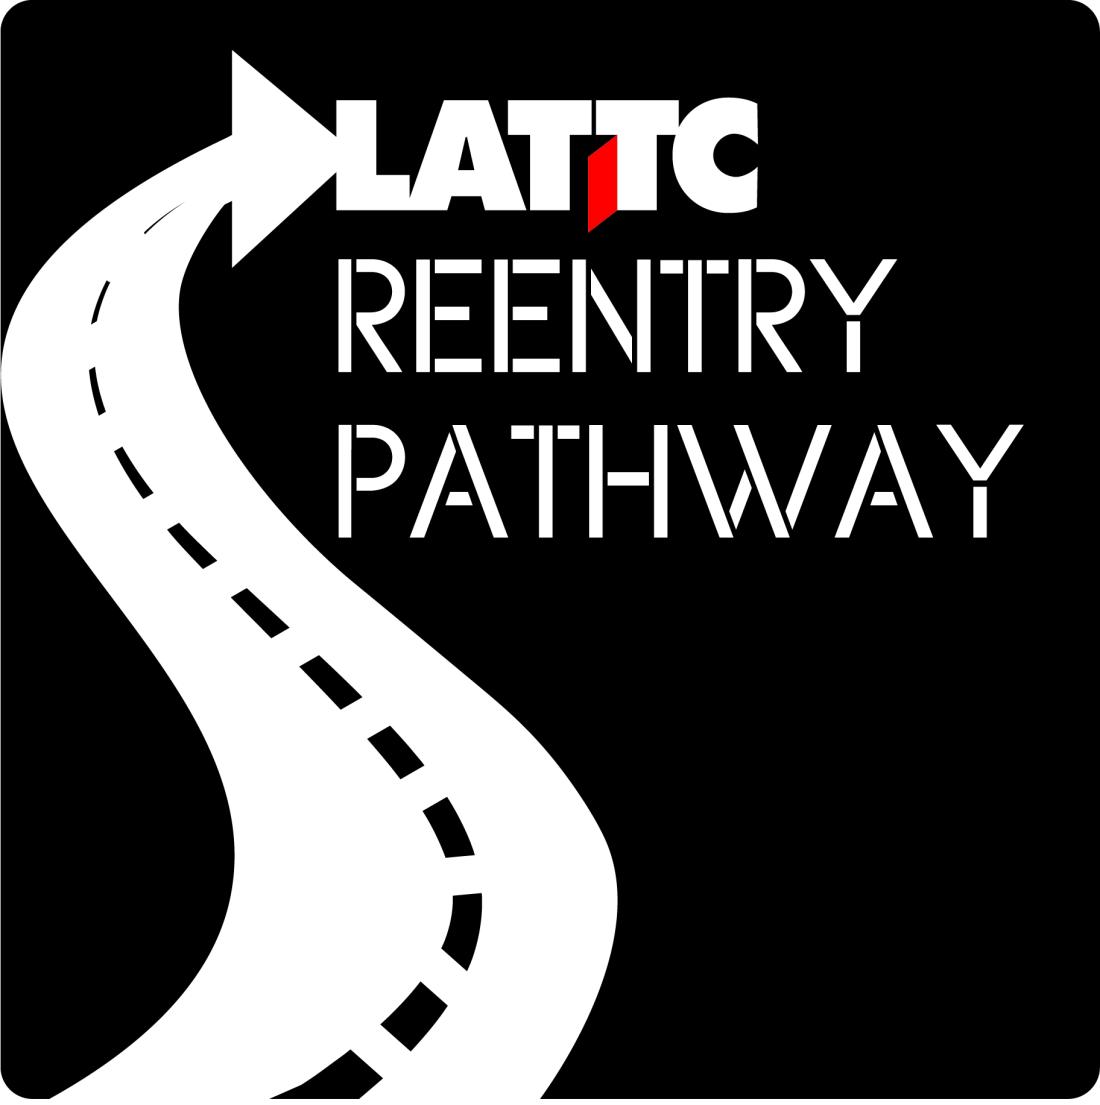 Reentry Pathway logo, arrow like a road pointing to LATTC